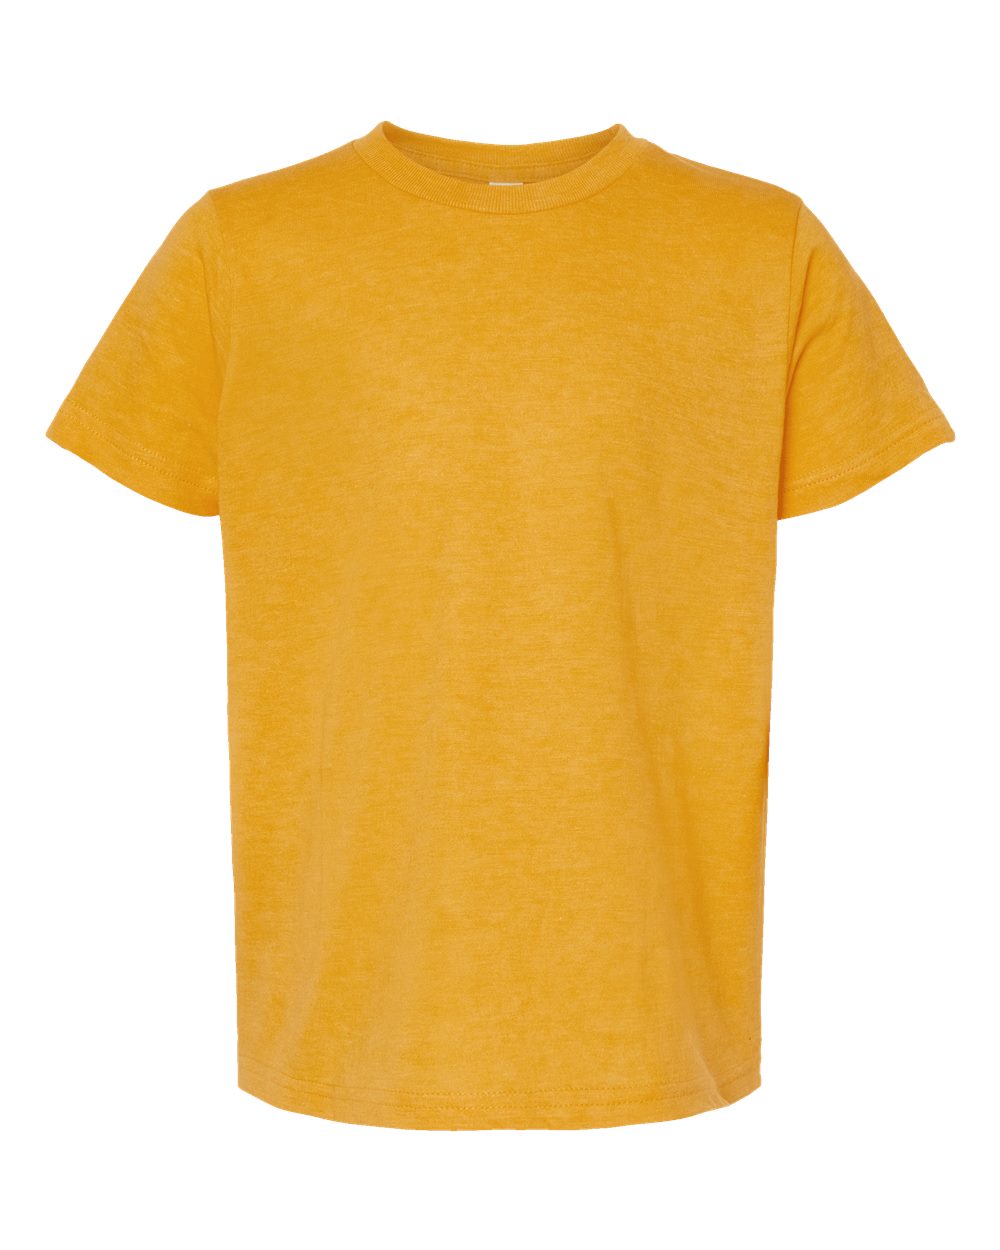 Tultex Youth Tee (235) in Heather Mellow Yellow